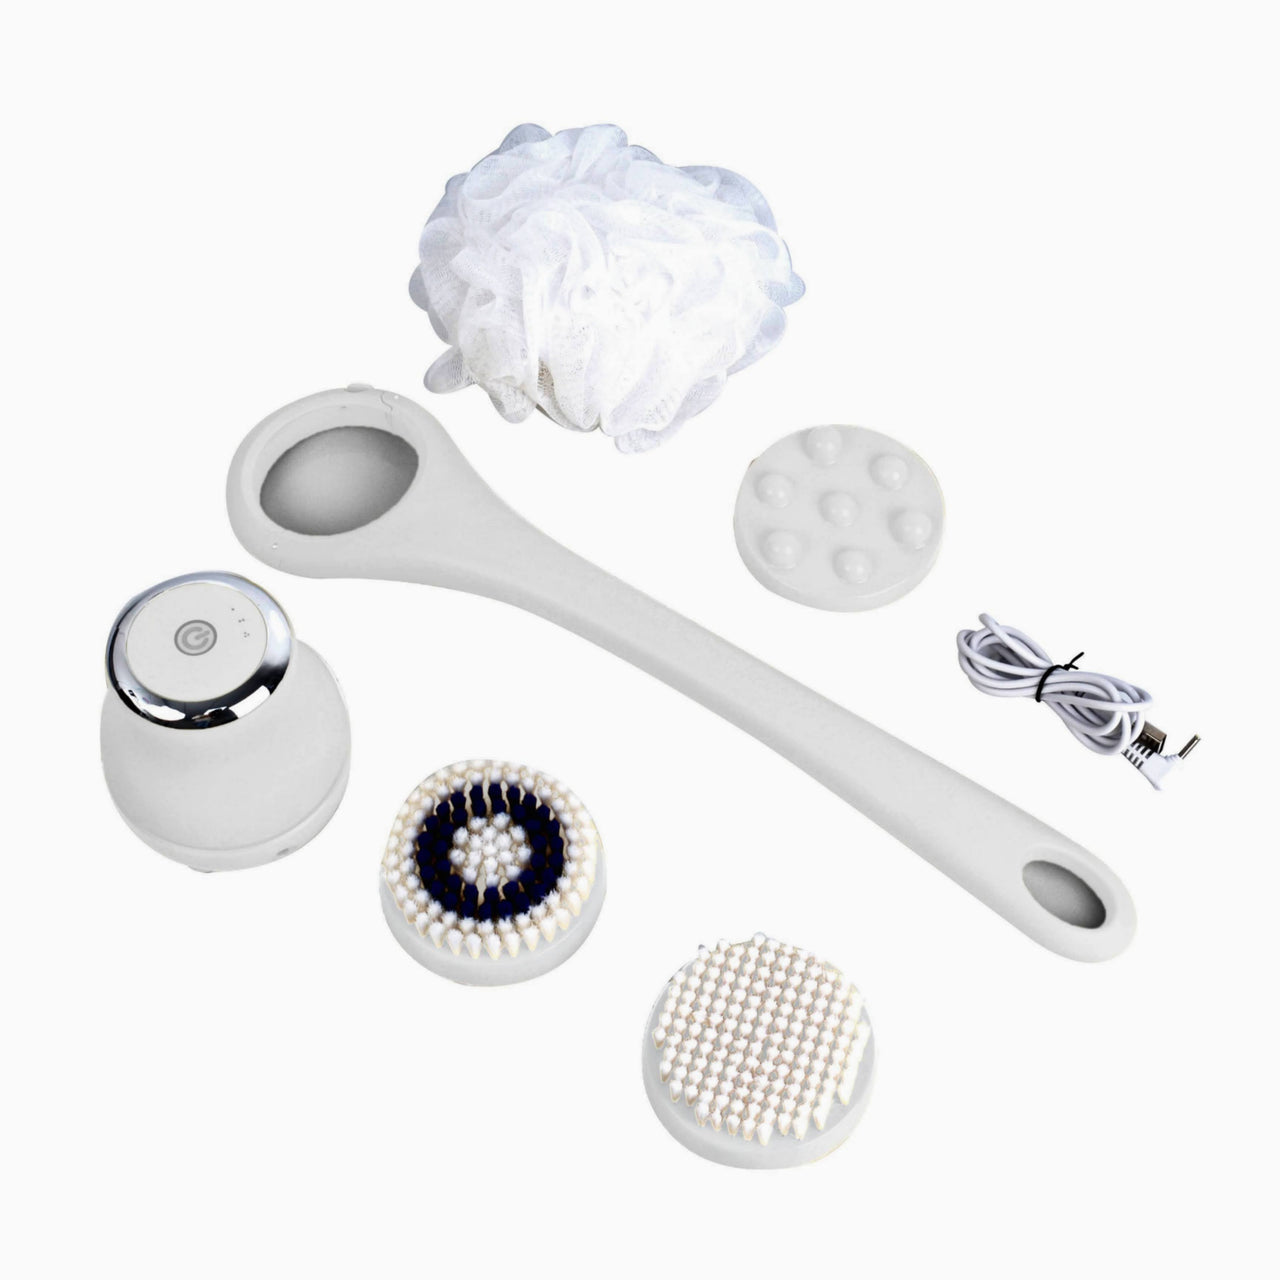 Wireless Waterproof Cleansing and Exfoliating Body Brush Set with 3 Speed 4 Brush Heads Bright White